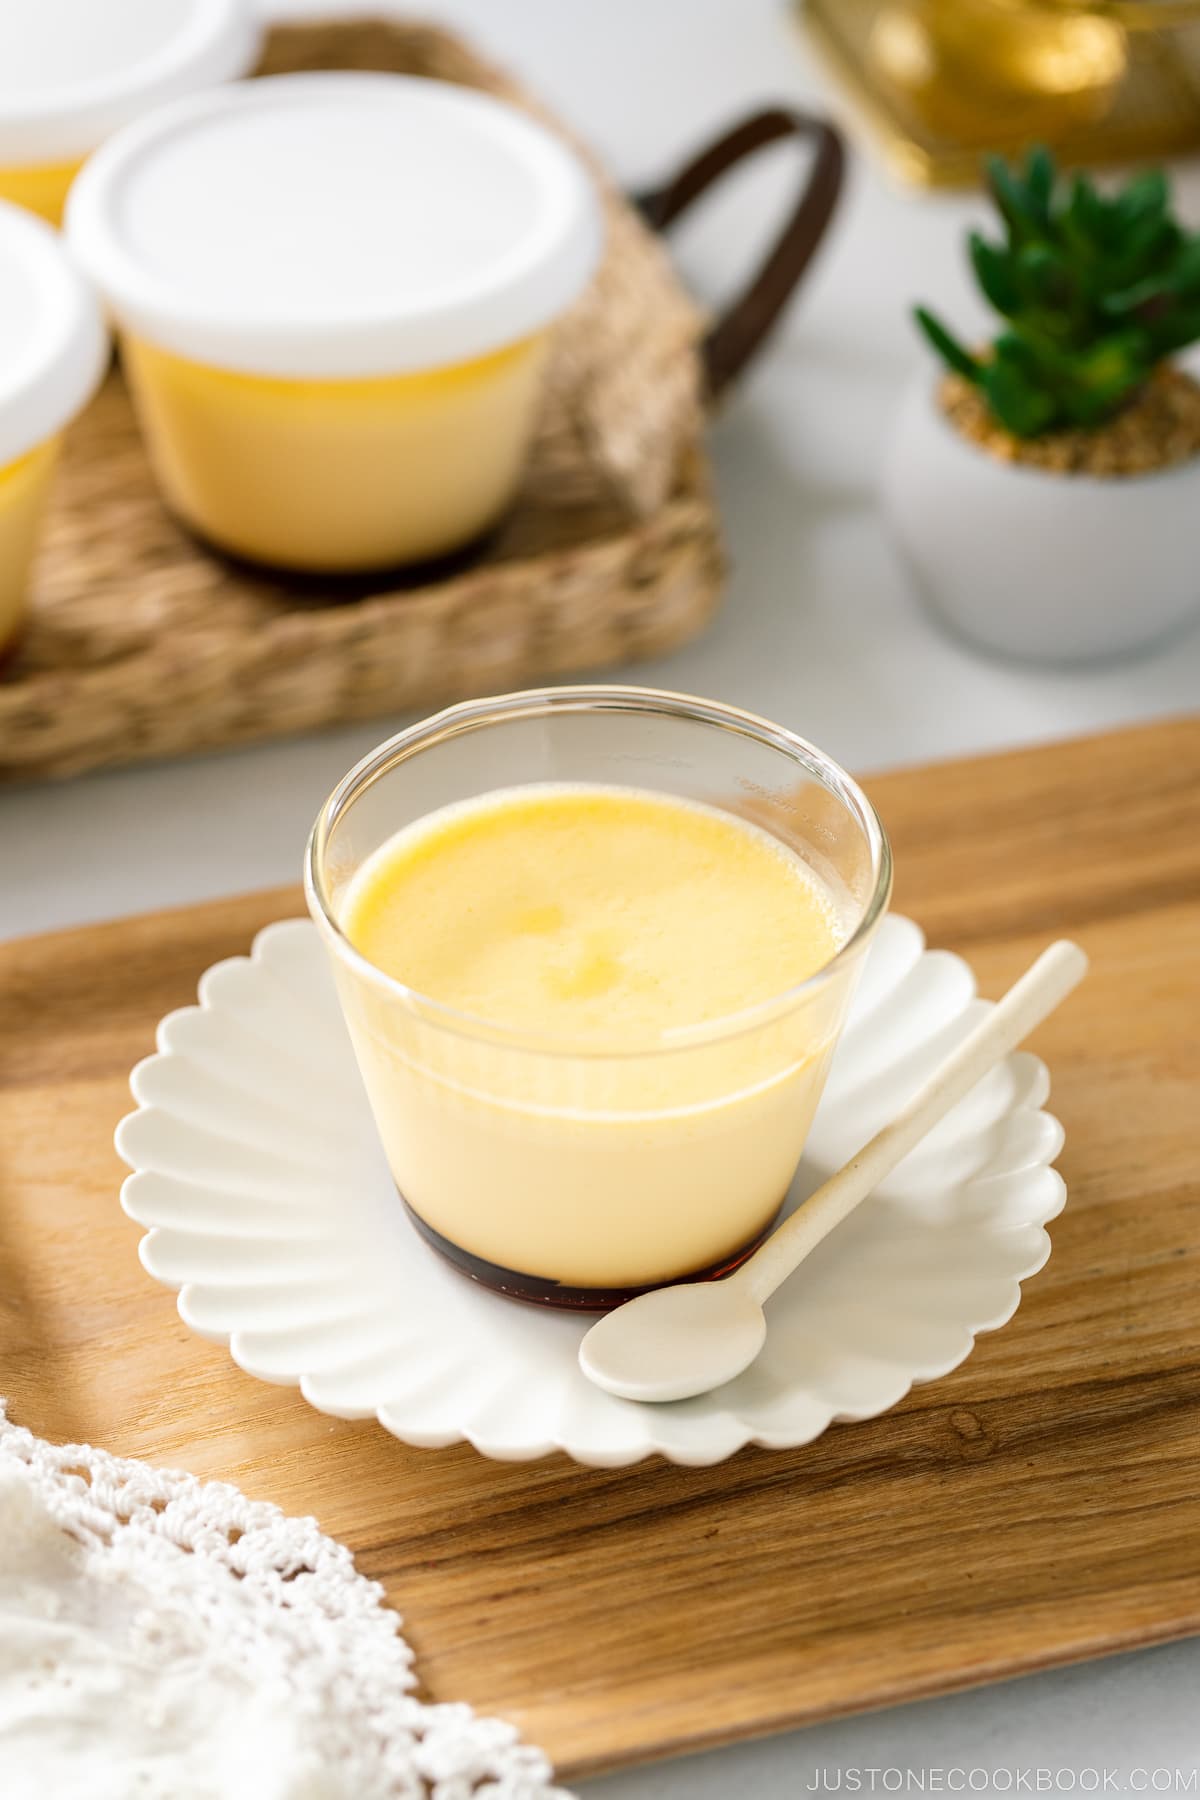 A glass cup containing Purin (Japanese Custard Pudding).